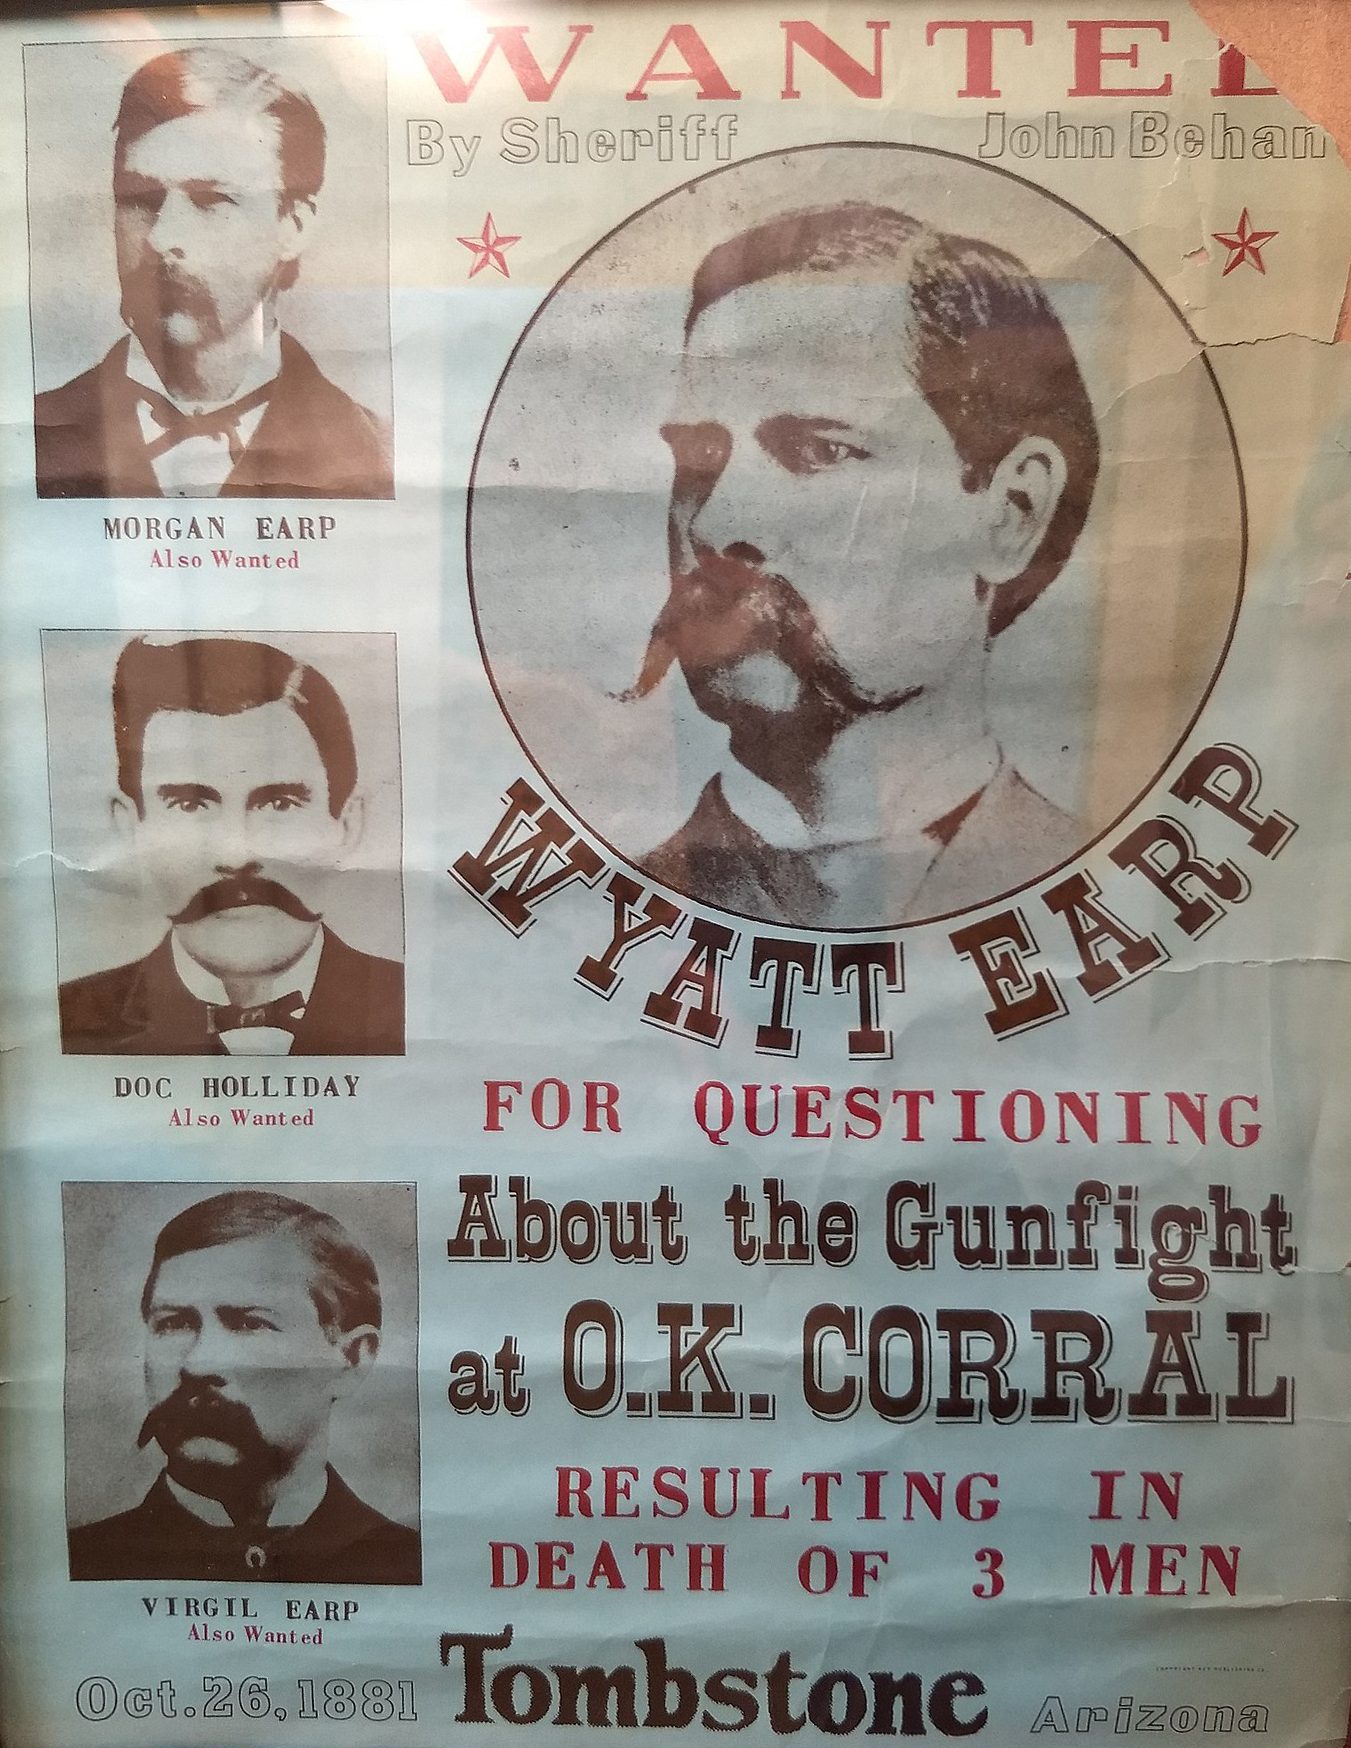 The poster shows a mugshot of four men, the man in the center of the poster has a mustache standing in front of a large white wall. The man is wearing a dark suit and has a look of determination on his face. The word "Wanted" written in black text at the top.